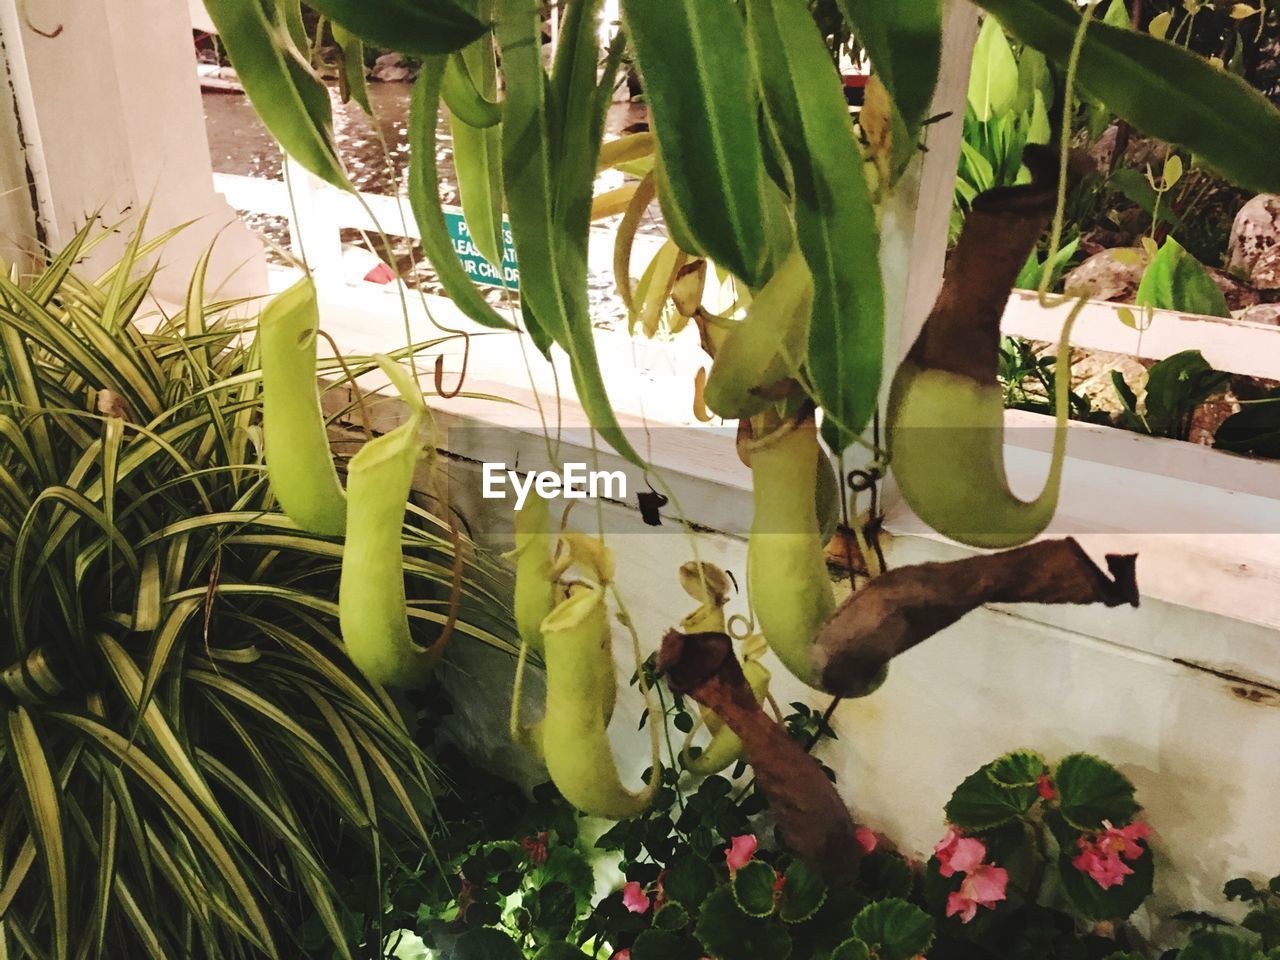 CLOSE-UP OF POTTED PLANT AGAINST PLANTS